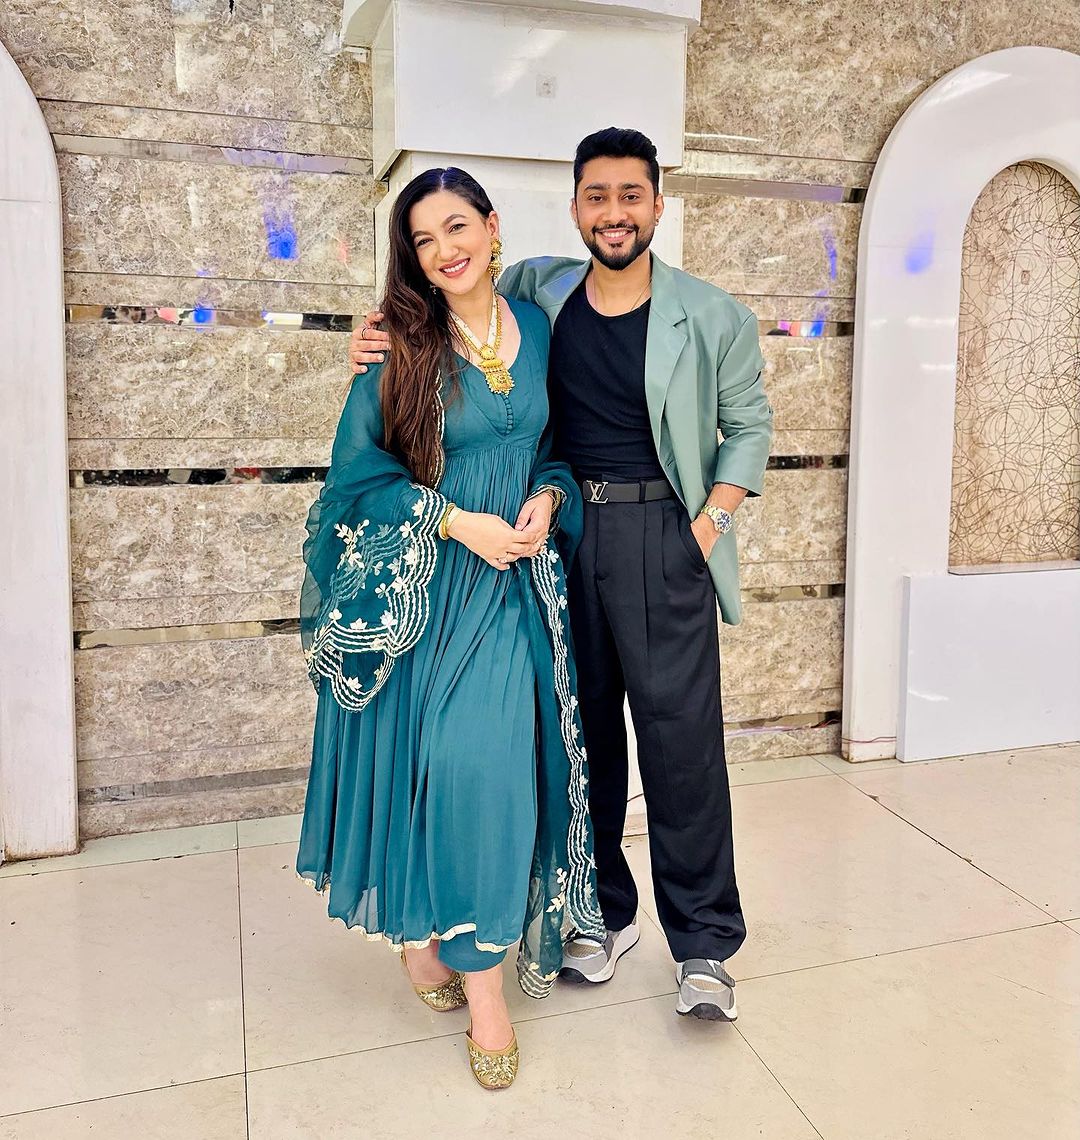 Gauahar Khan Gonna Appear In A New Role As Host For The Show “Jhalak Dikhhla Jaa” Season 11. She Received Heartfelt Support From Her Husband Zaid Darbar